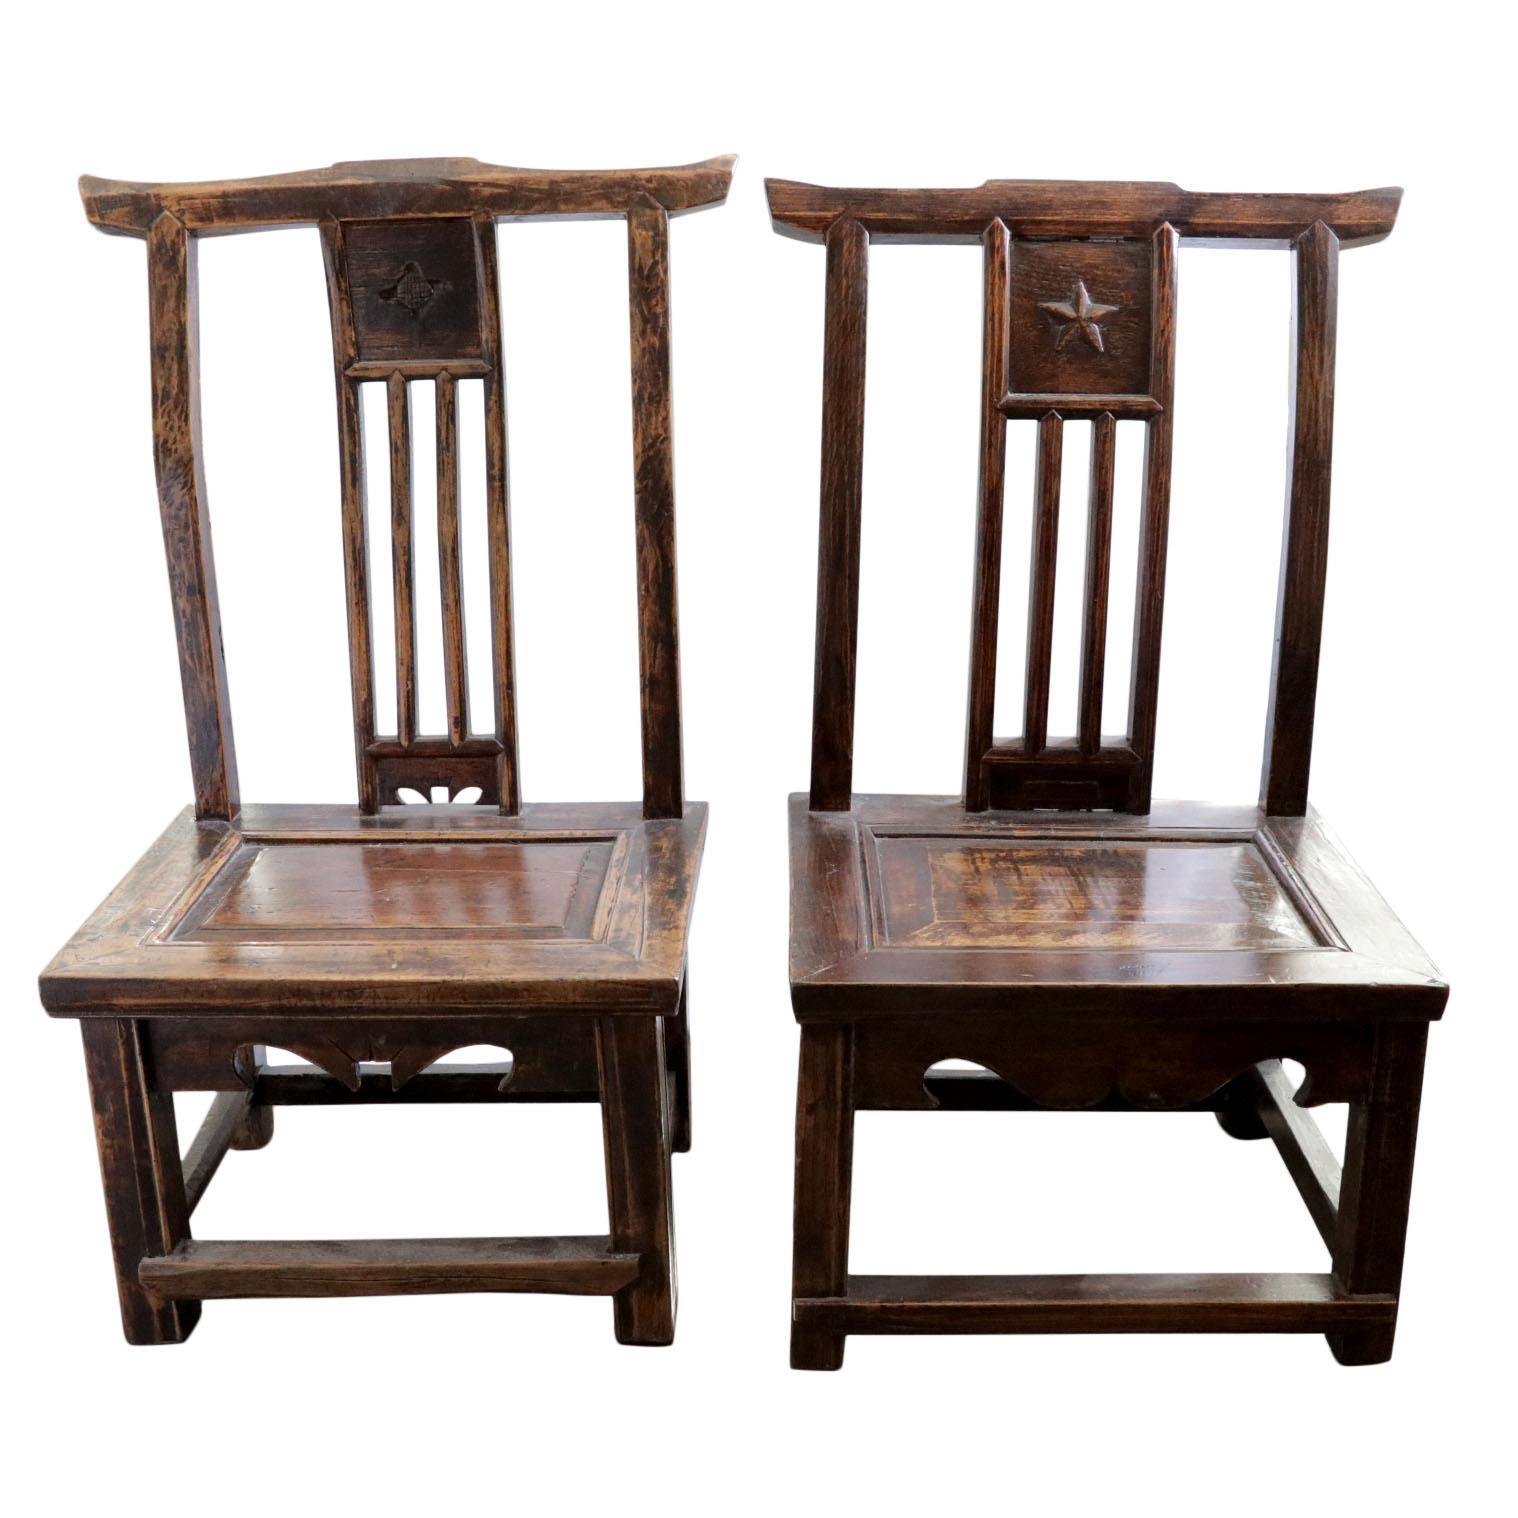 Pair of antique Chinese low seating chairs. Chair 1: 17.75